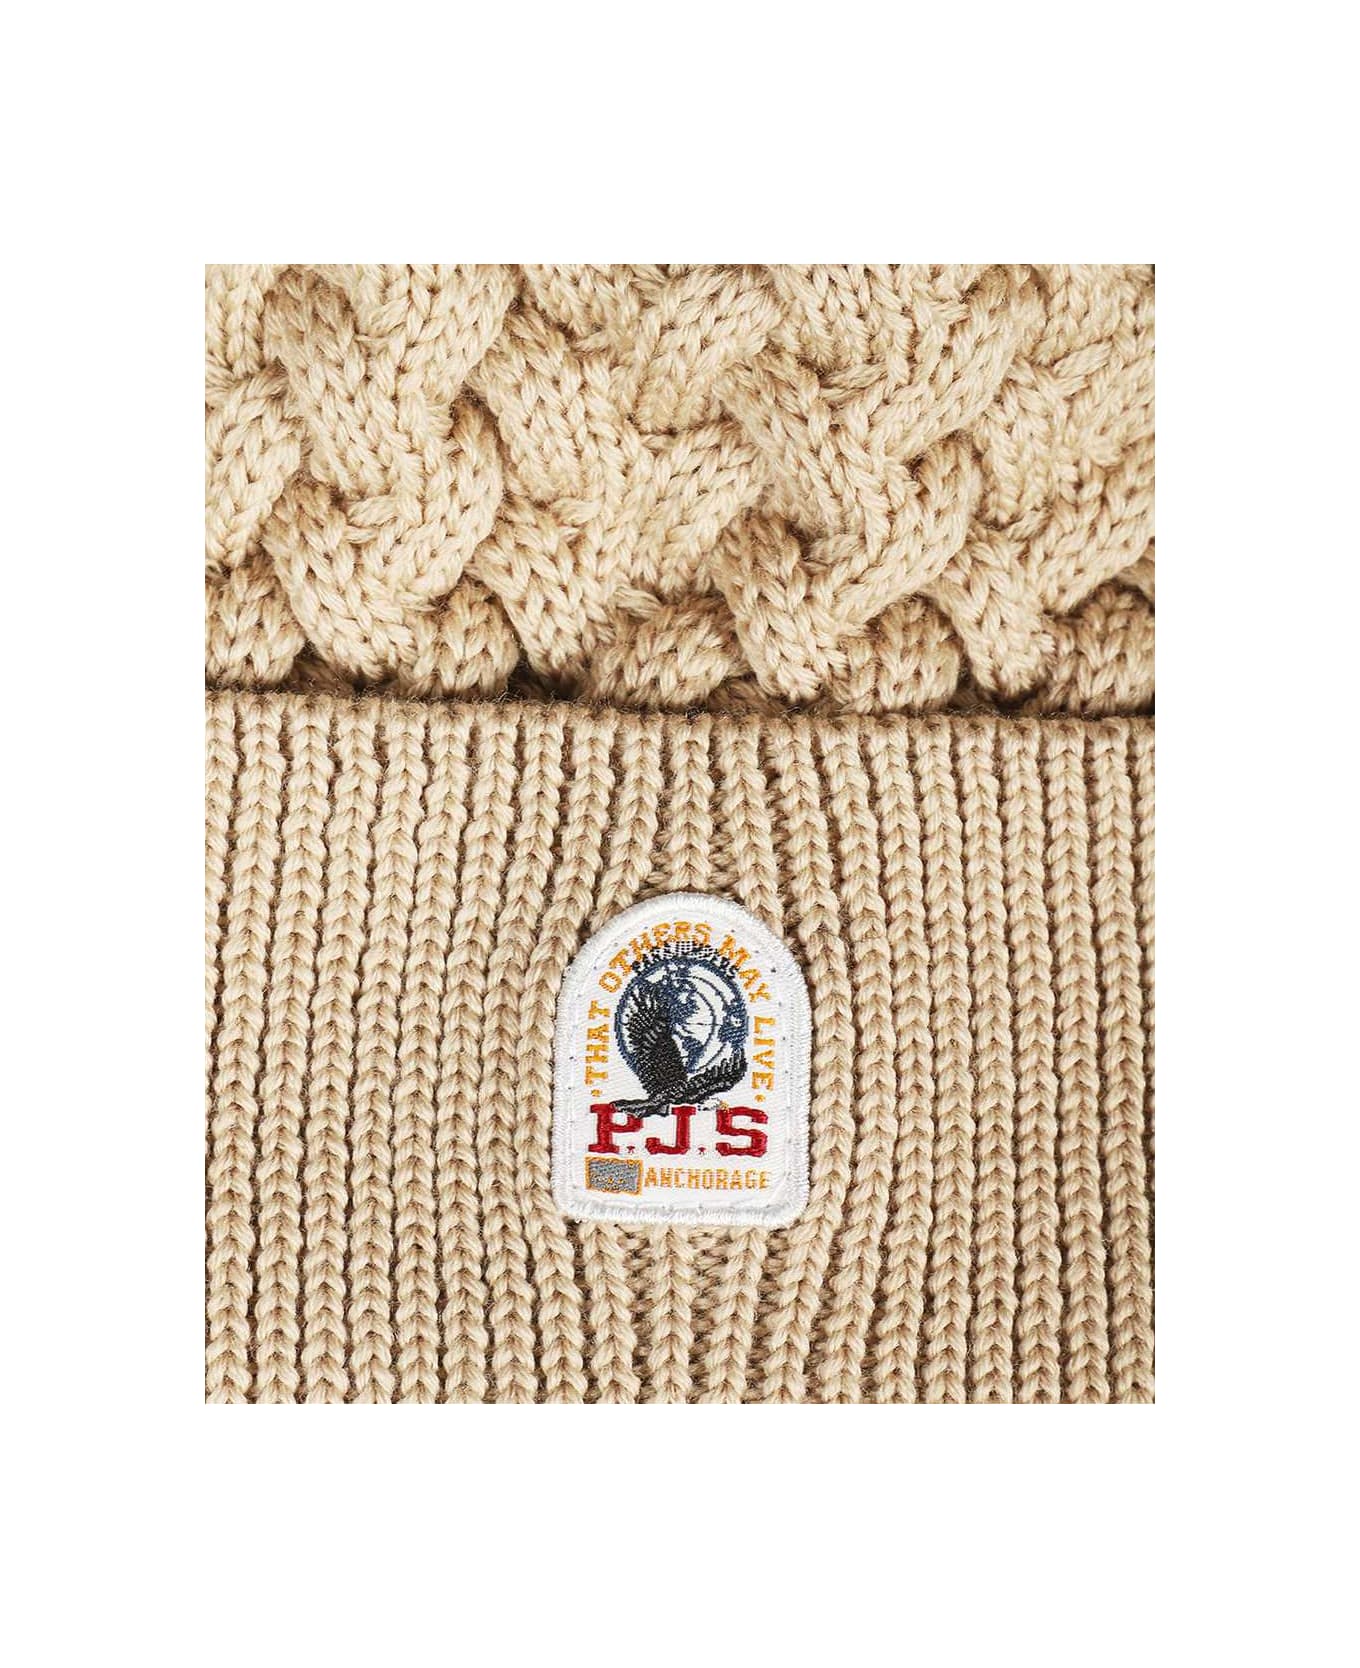 Parajumpers Knitted Beanie With Pom-pom - Camel 帽子